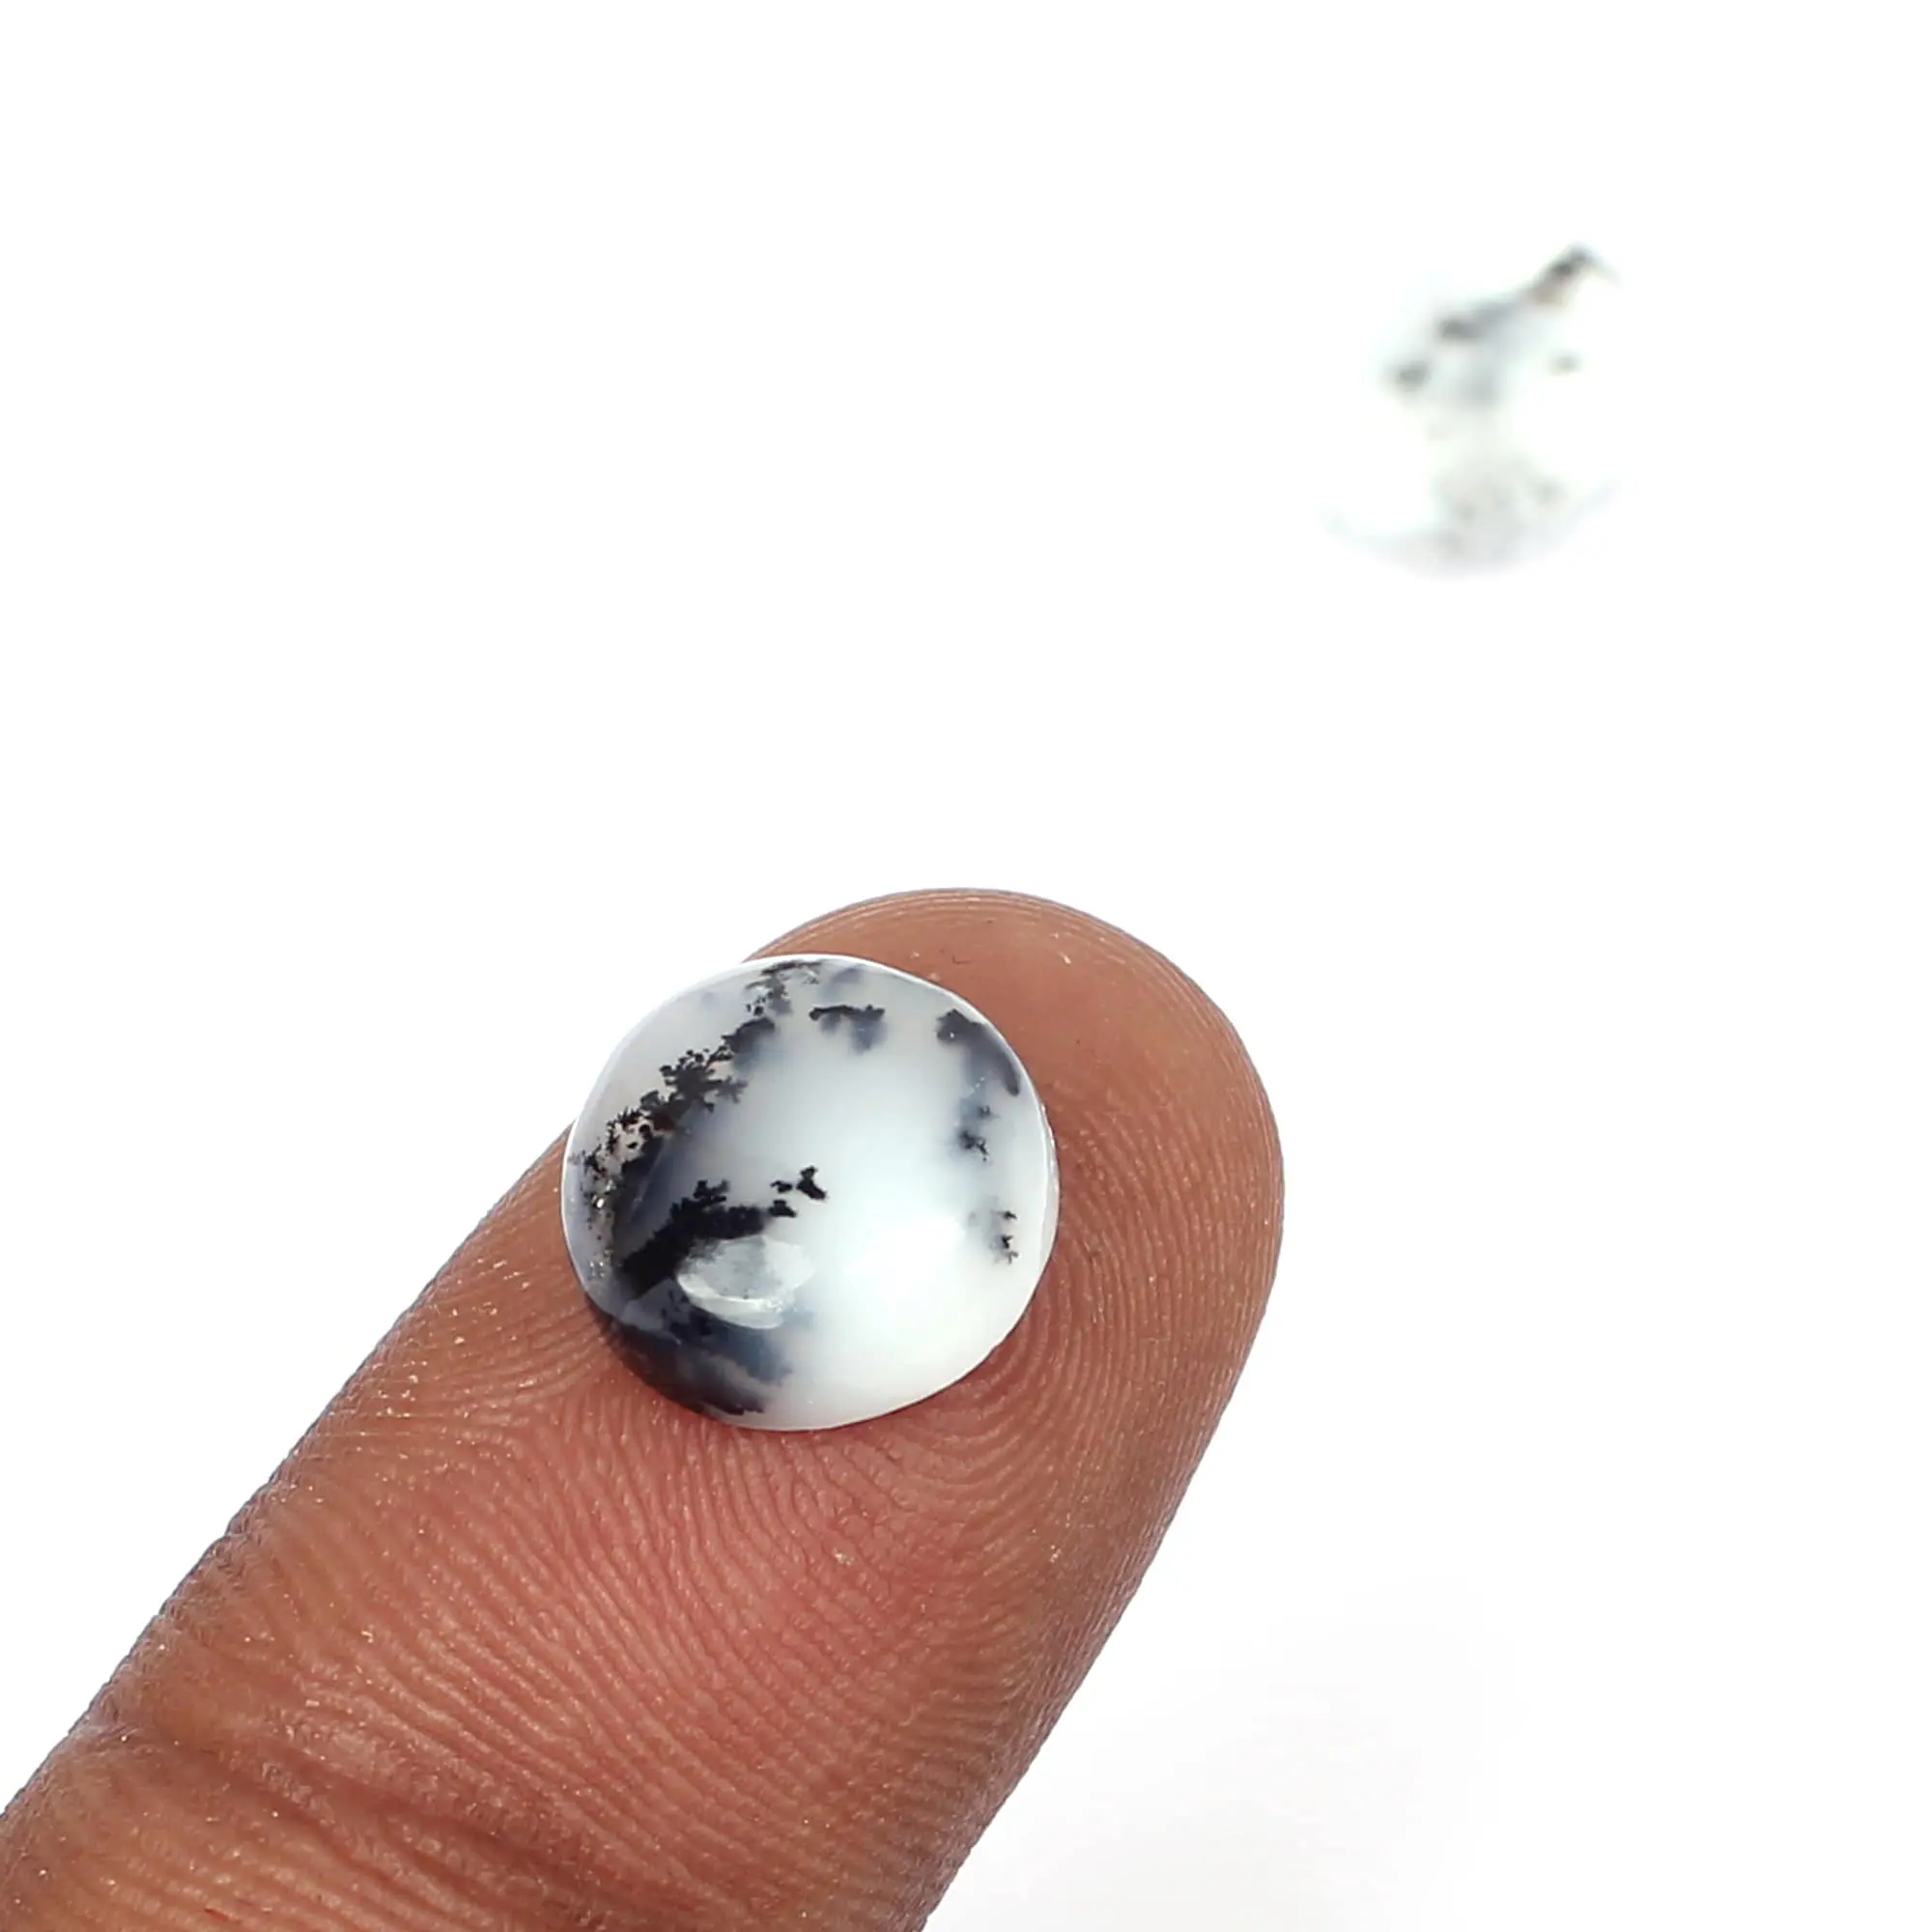 Smooth round gemstone natural dendritic opal 10mm 2.95 Cts for making jewellery